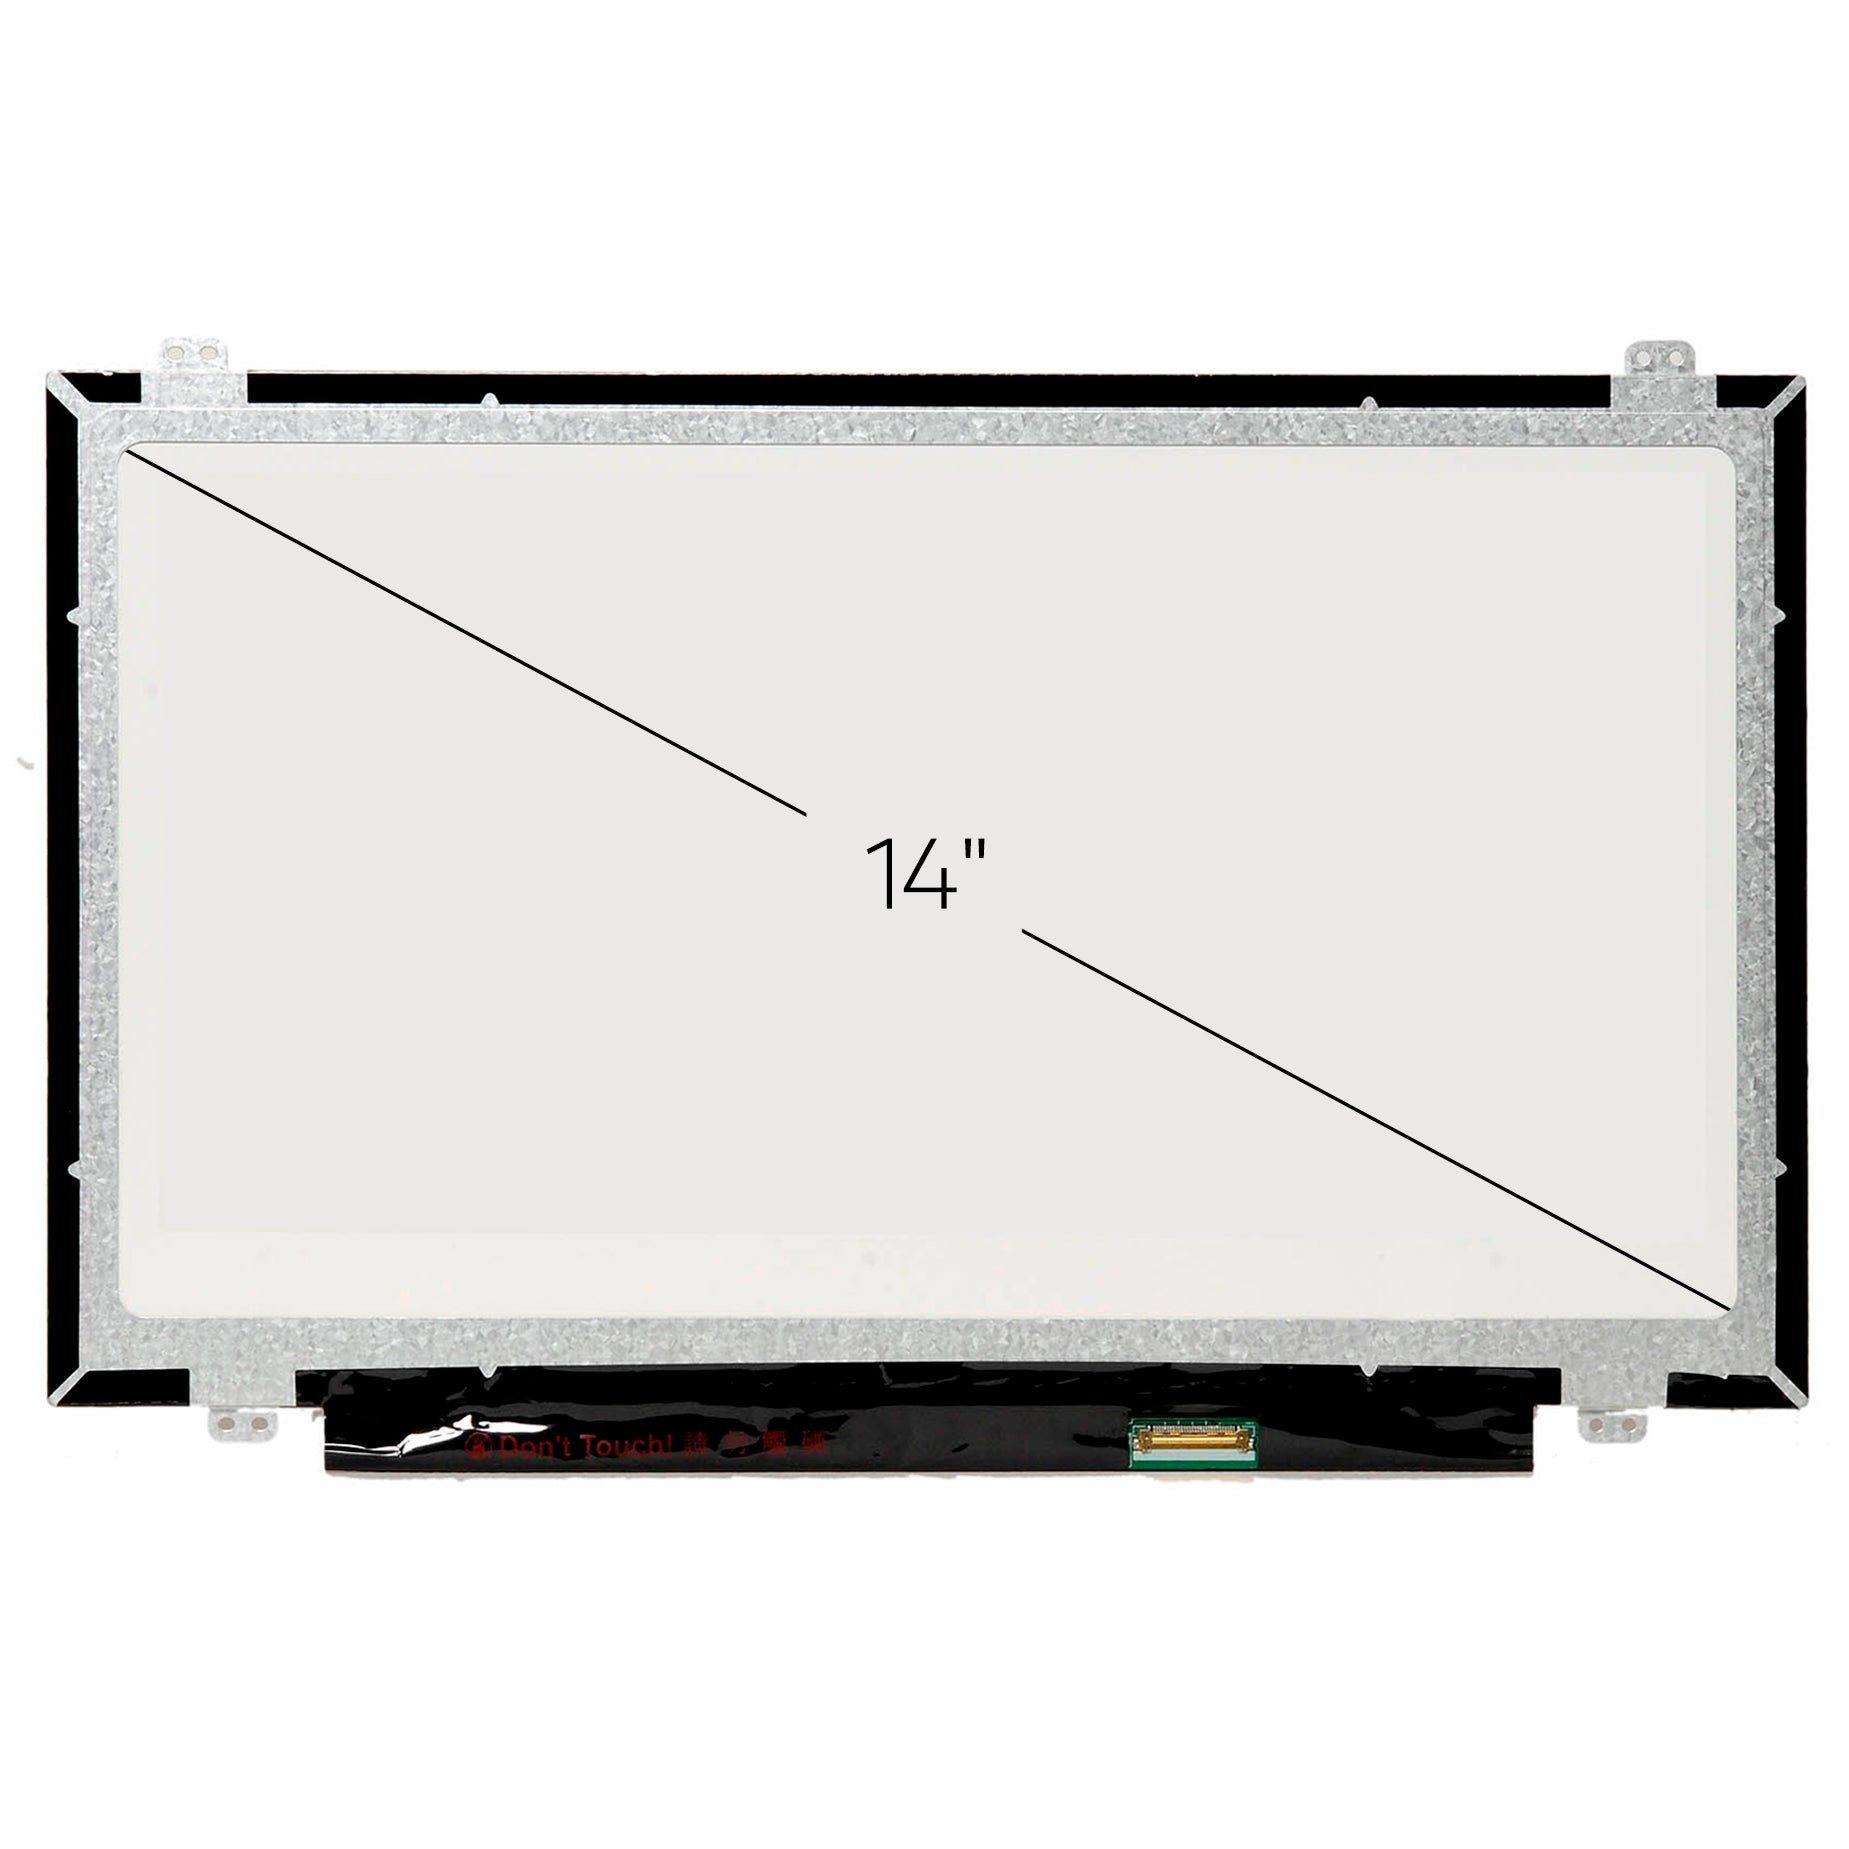 Screen Replacement for HP Stream 14-CB010DS 5LA35UA HD 1366x768 Glossy LCD LED Display